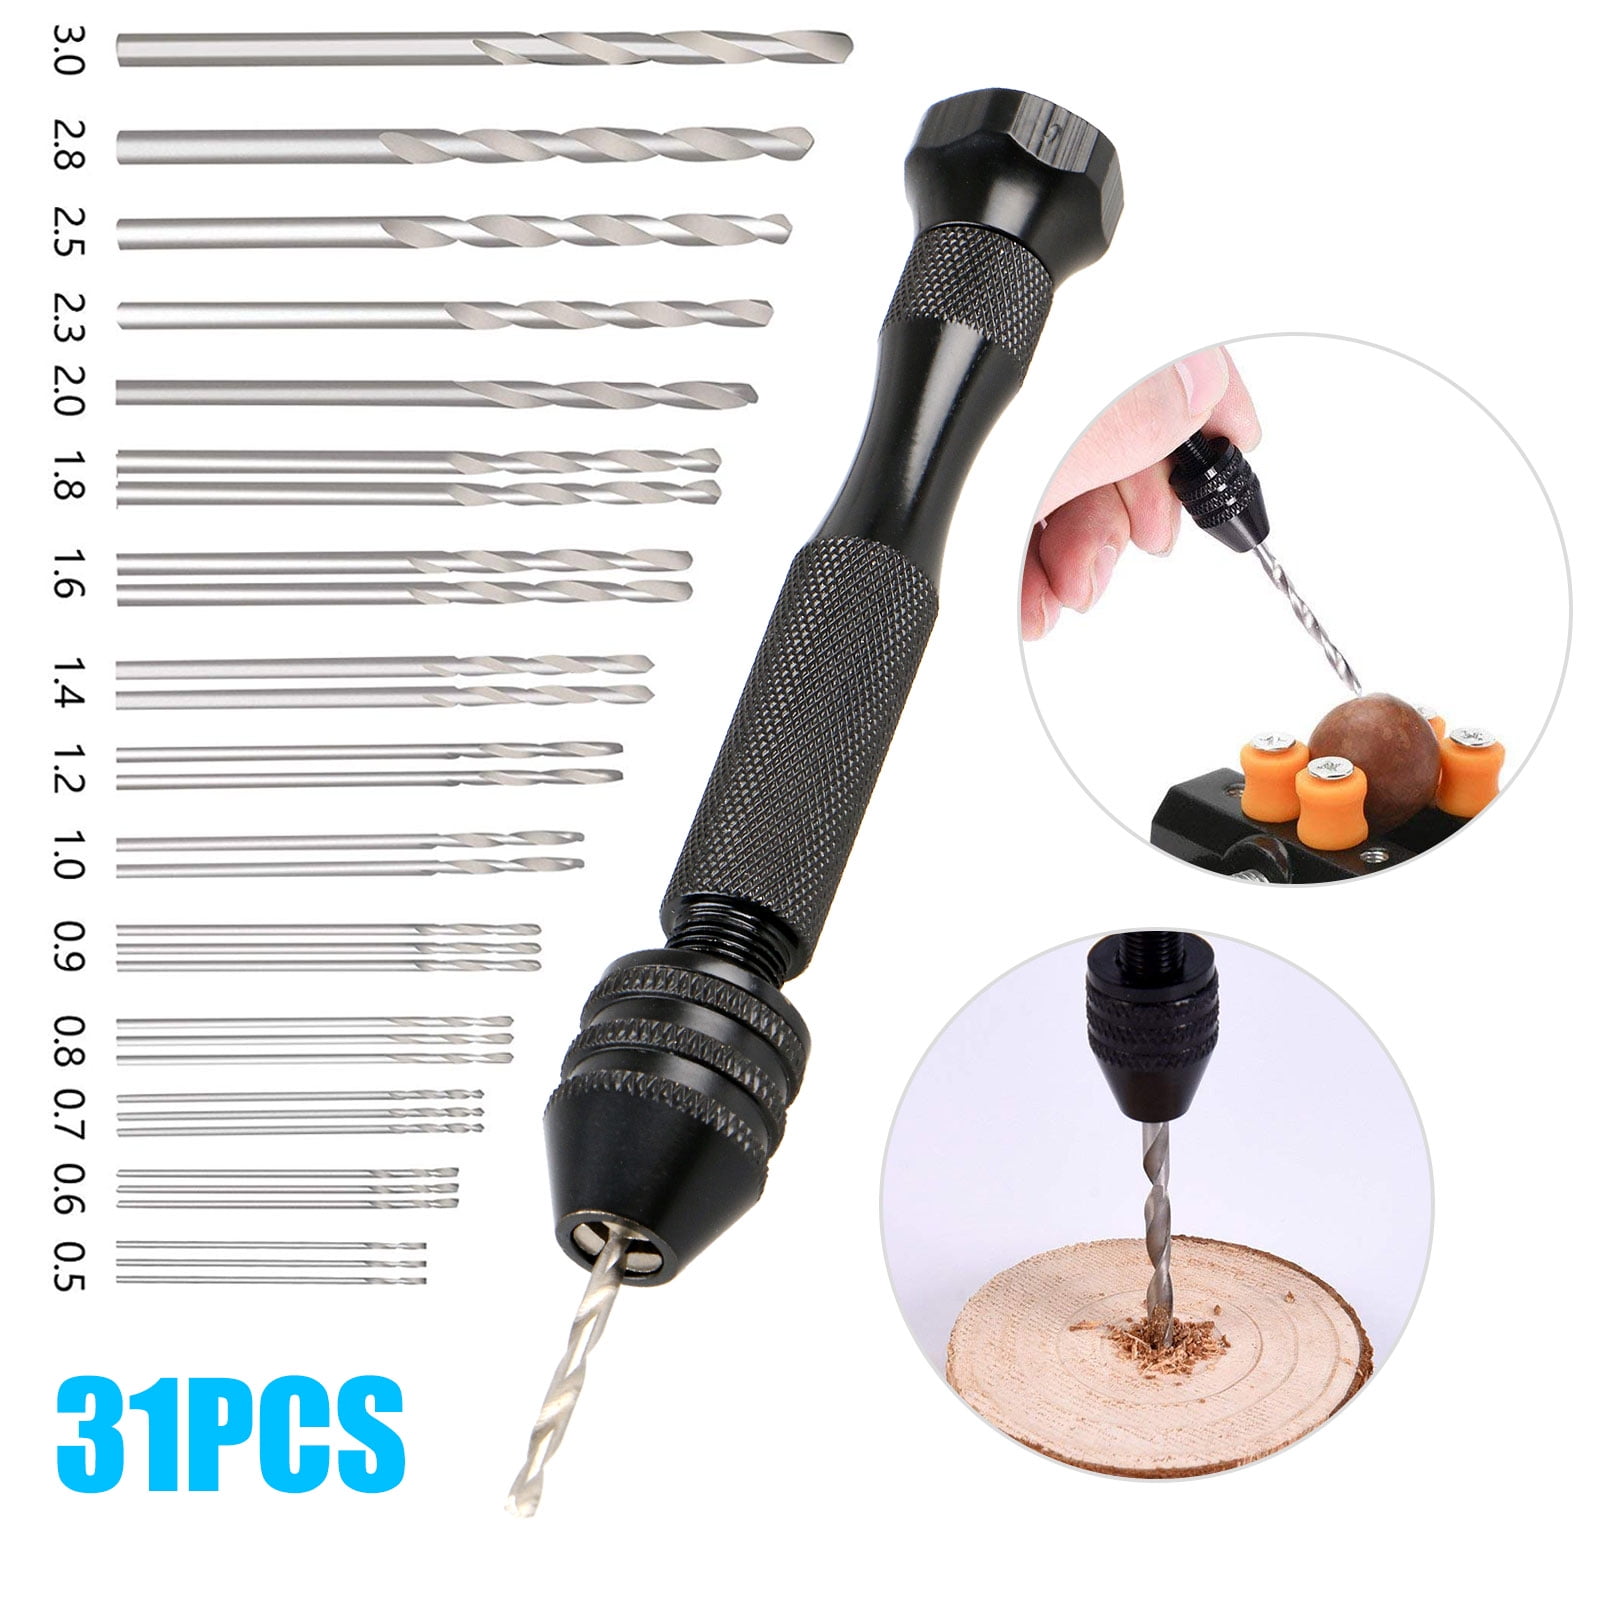 8 pcs Extra Long Drill Bits Set HSS Twist Drill Bits Small Hand Drill for Craft/Modeling/Making Holes/Jewelry Woodworking Rotary Tool